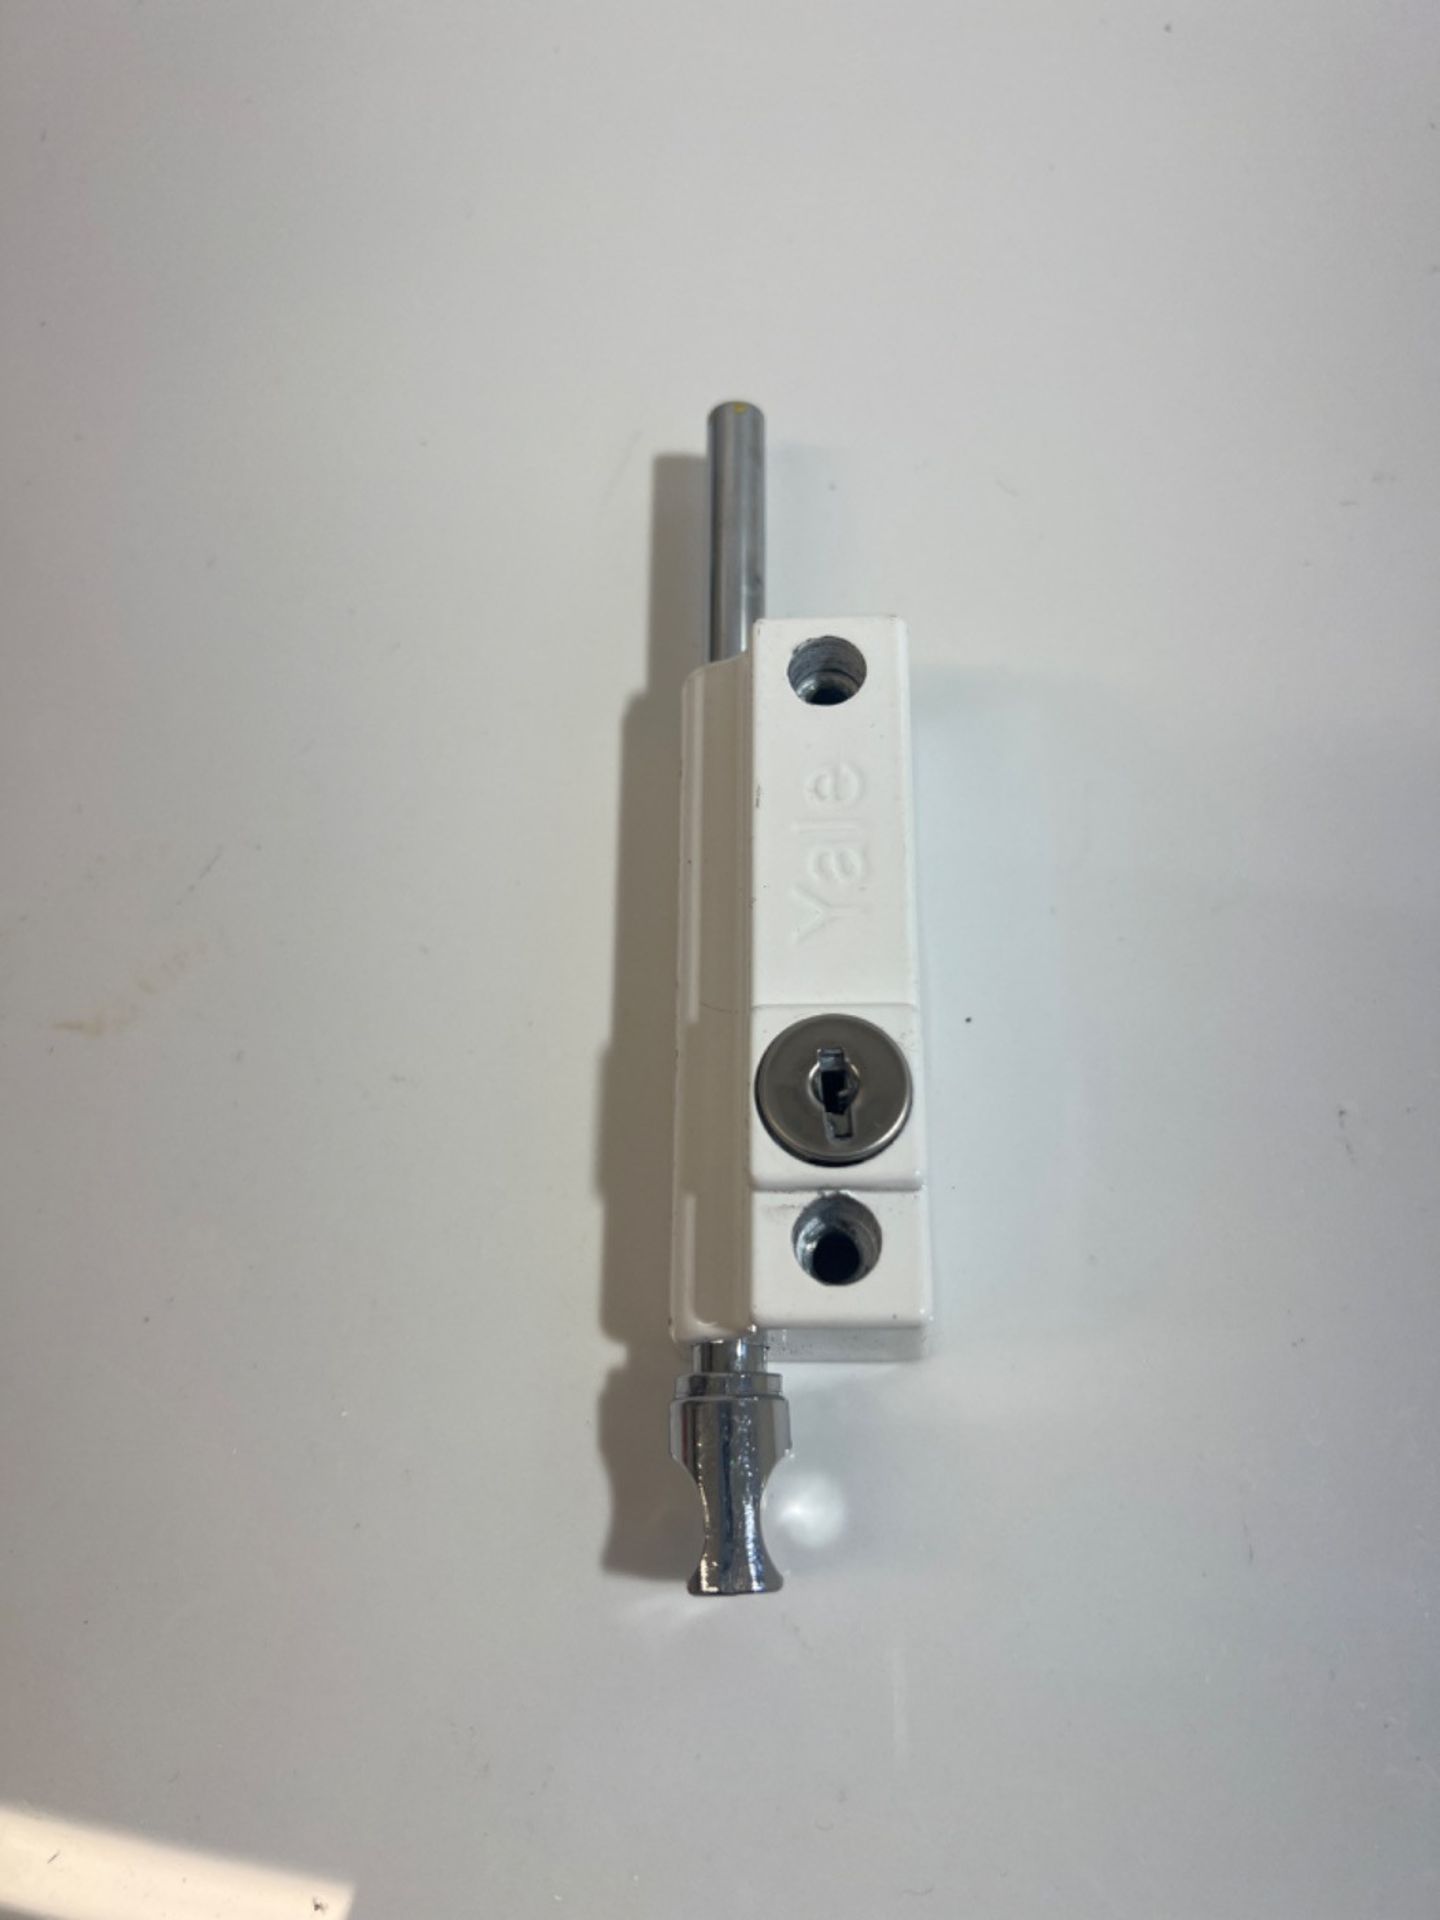 Yale P-124-WE Door Pushbolt, White Finish, Standard Security, Visi Packed, suitable for aluminium d - Image 3 of 3